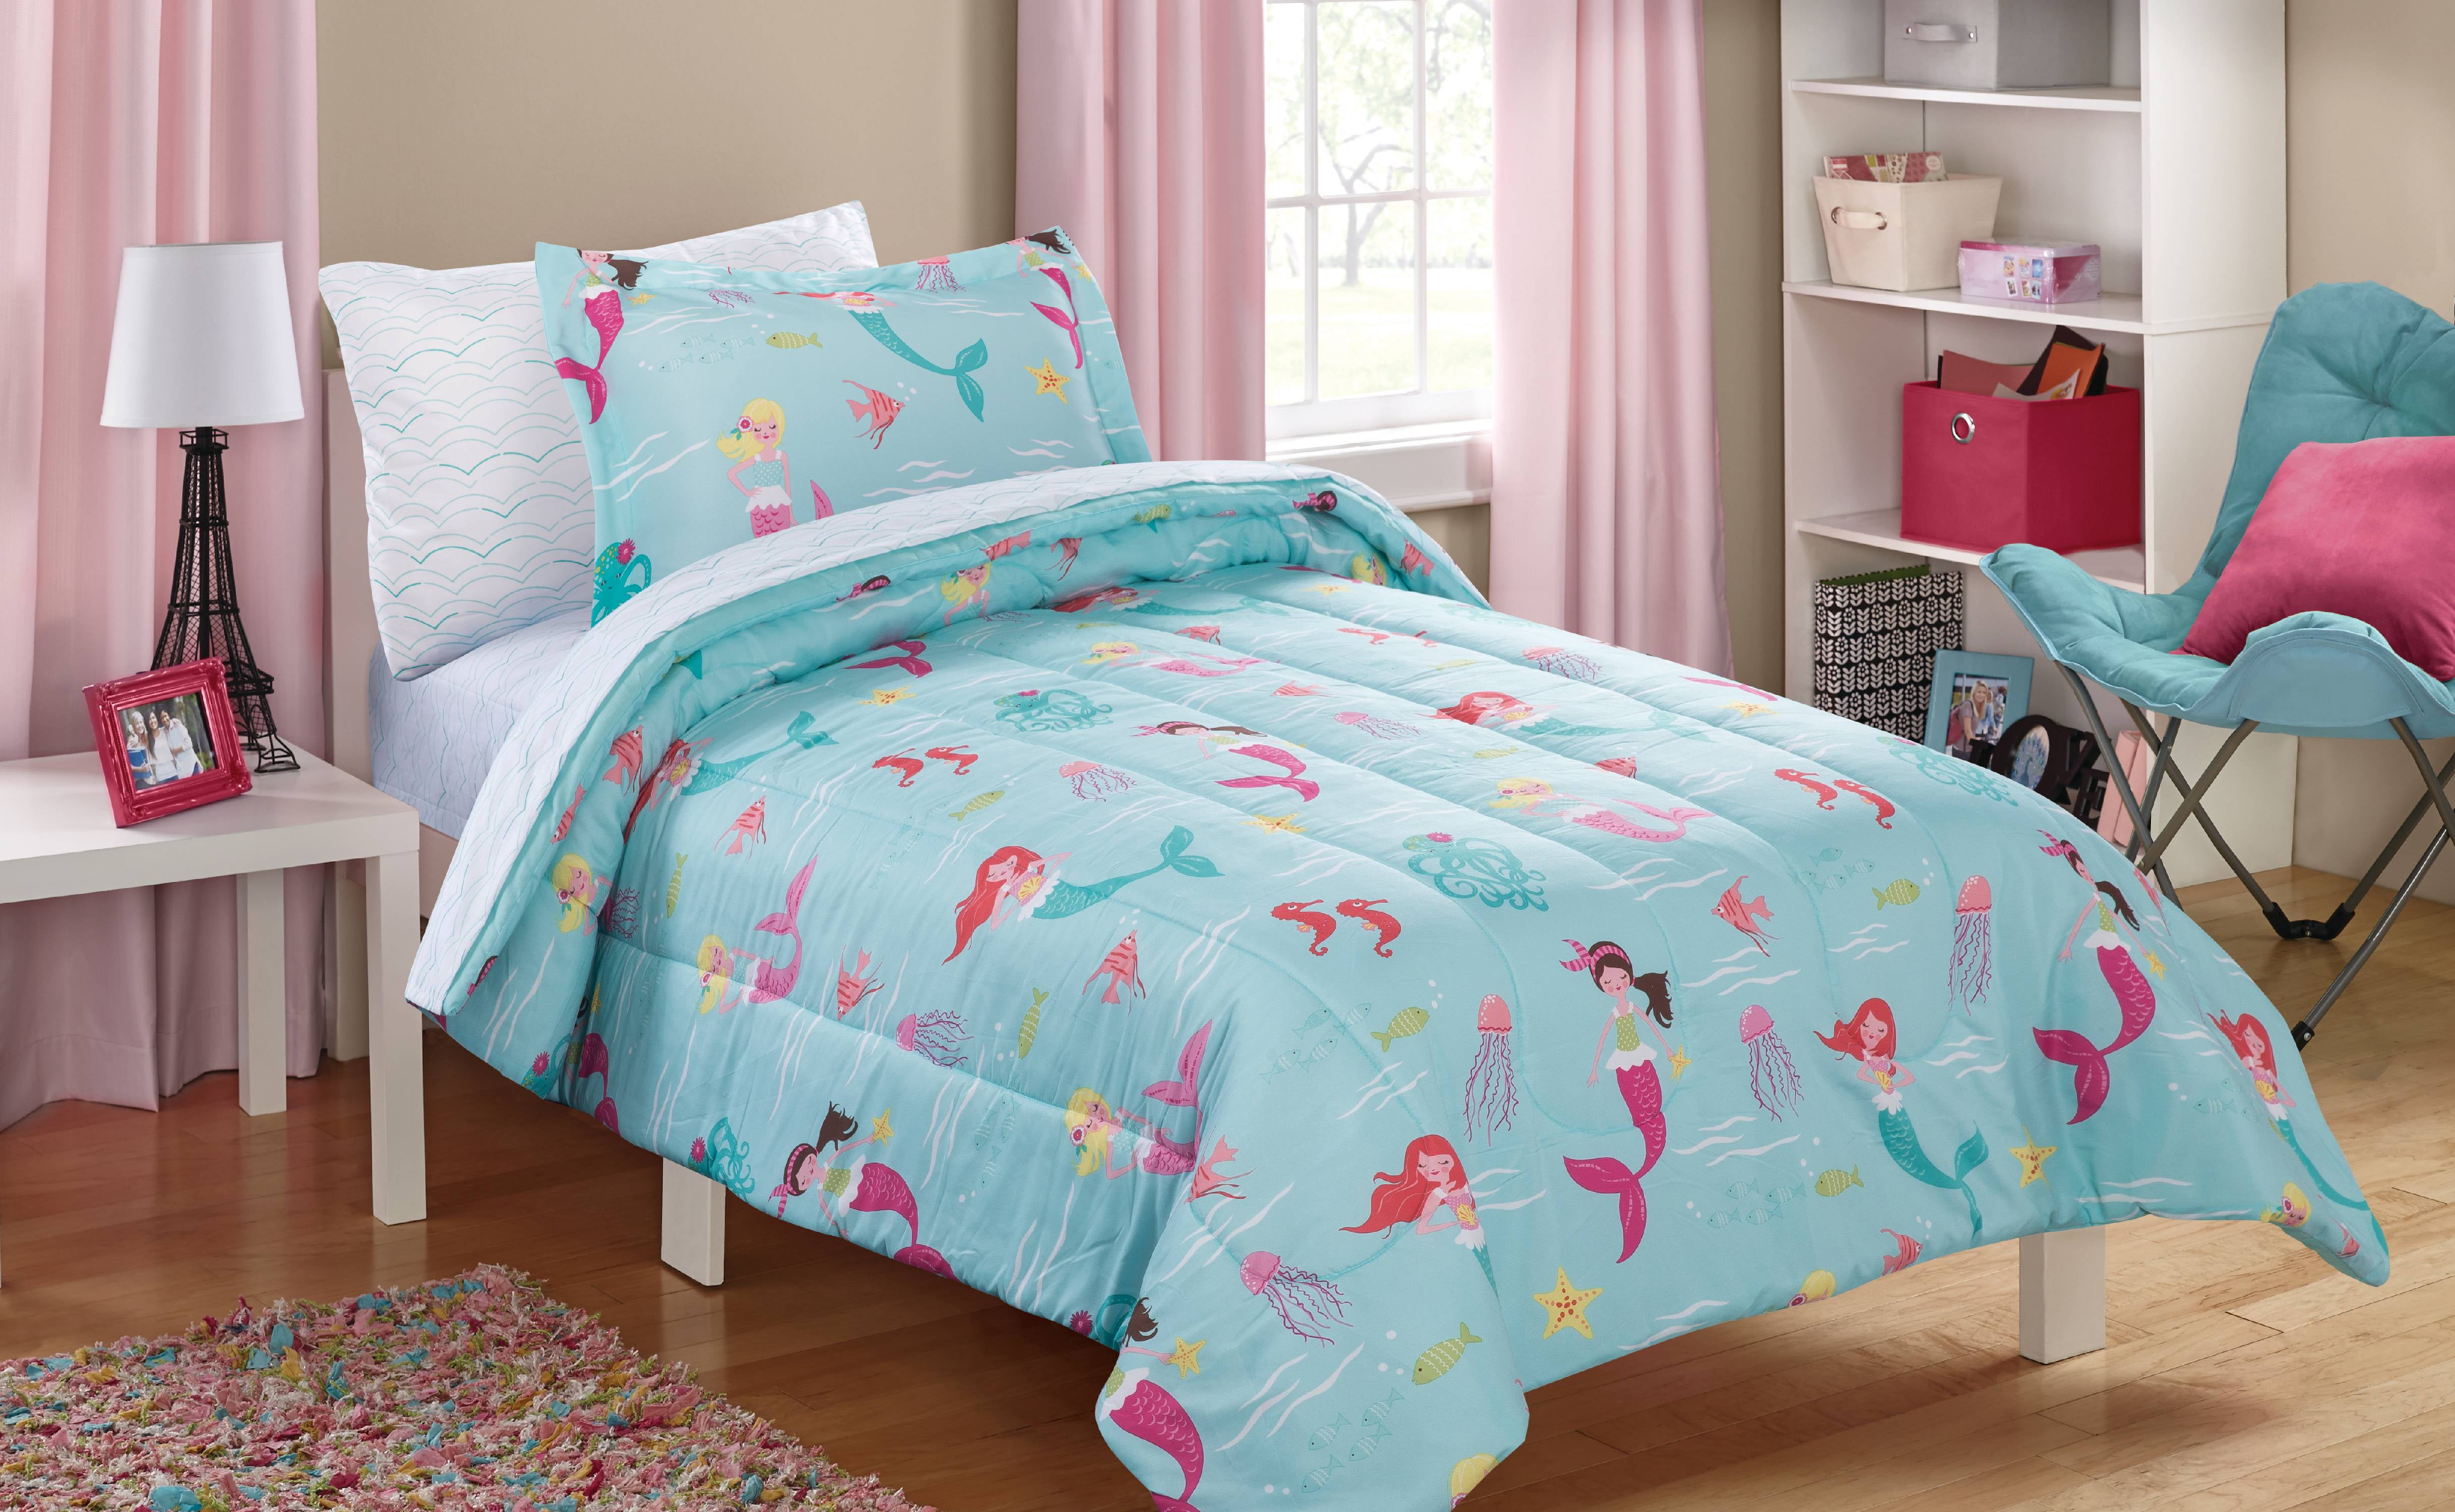 NEW Authentic Kids FULL SIZE Mermaid Sheet Set 100% Cotton Pink Teal White 